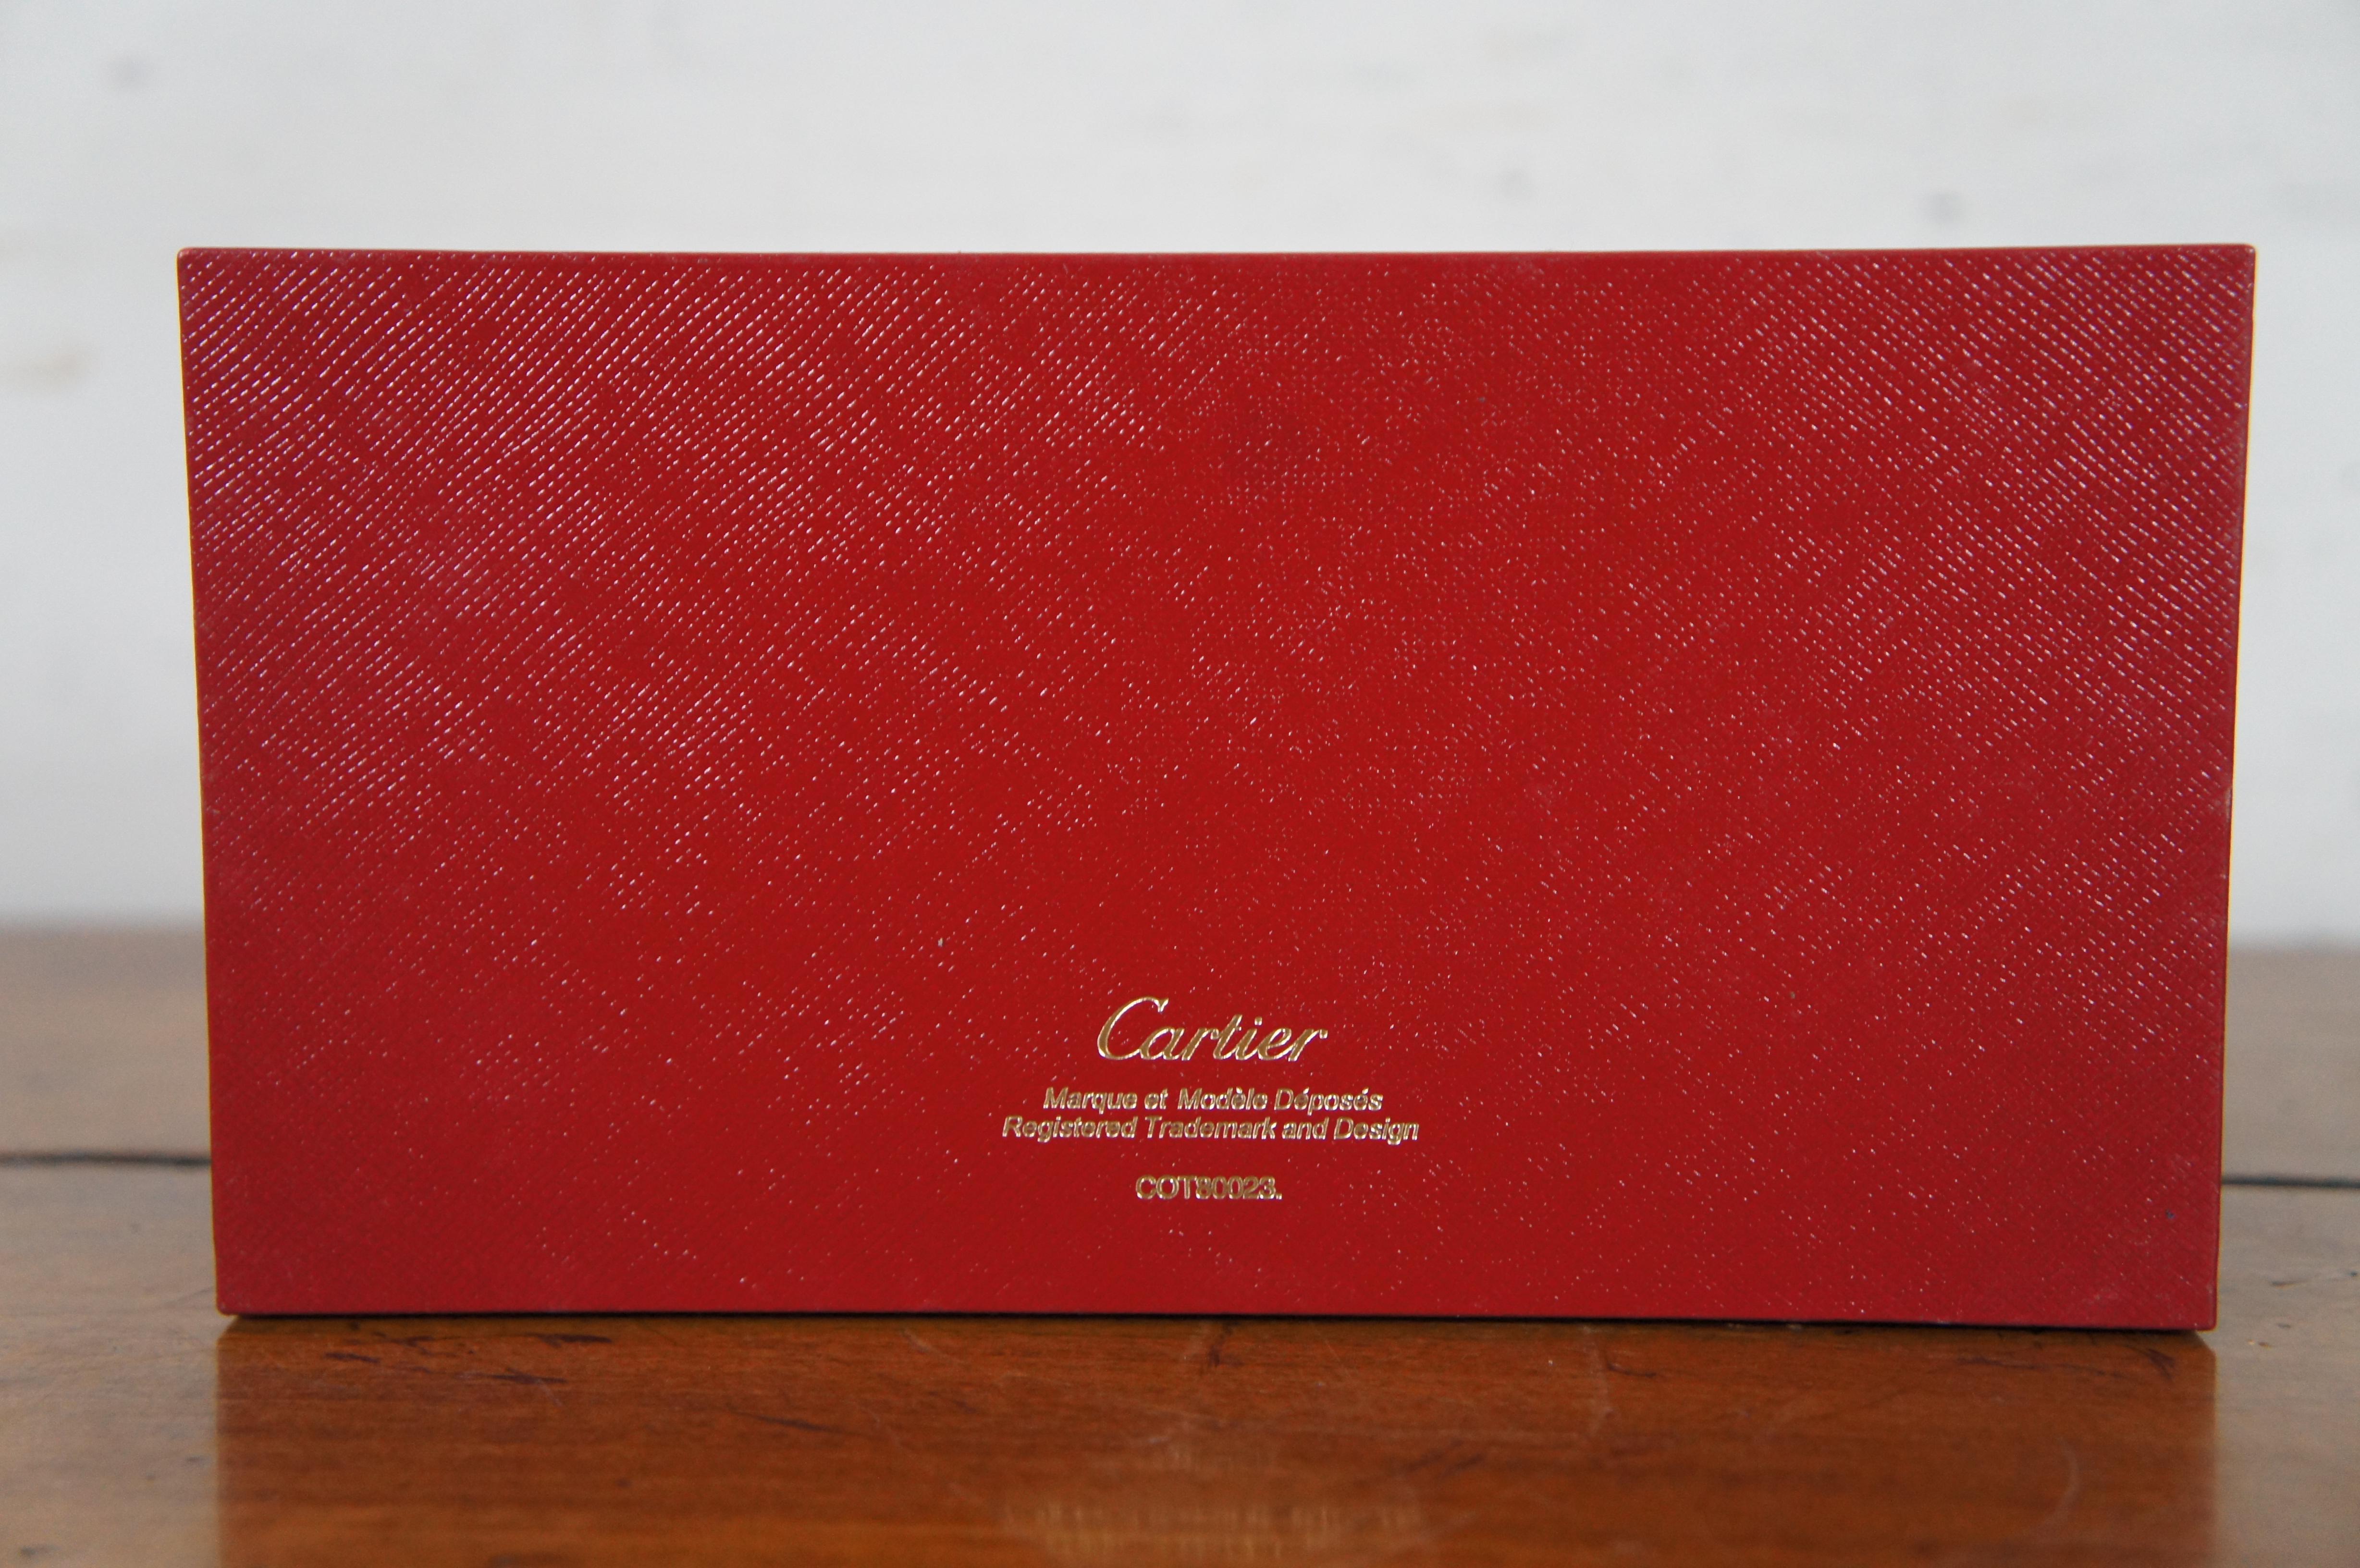 2 Cartier Glasses Sunglasses Case Pair Red Leather Sleeve Embossed Box 5